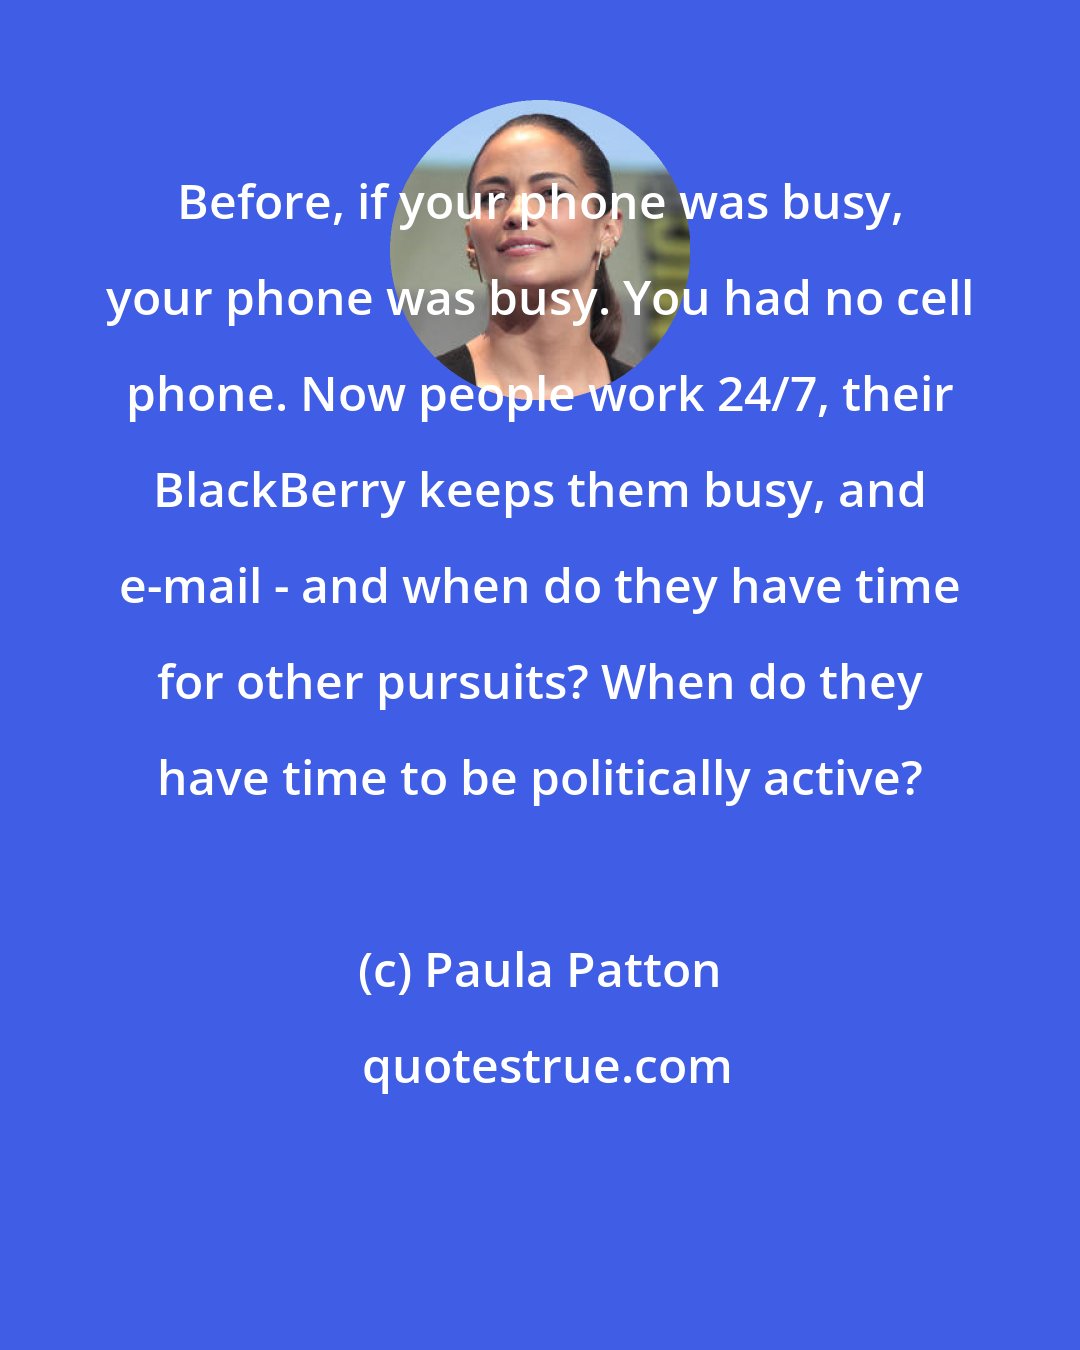 Paula Patton: Before, if your phone was busy, your phone was busy. You had no cell phone. Now people work 24/7, their BlackBerry keeps them busy, and e-mail - and when do they have time for other pursuits? When do they have time to be politically active?